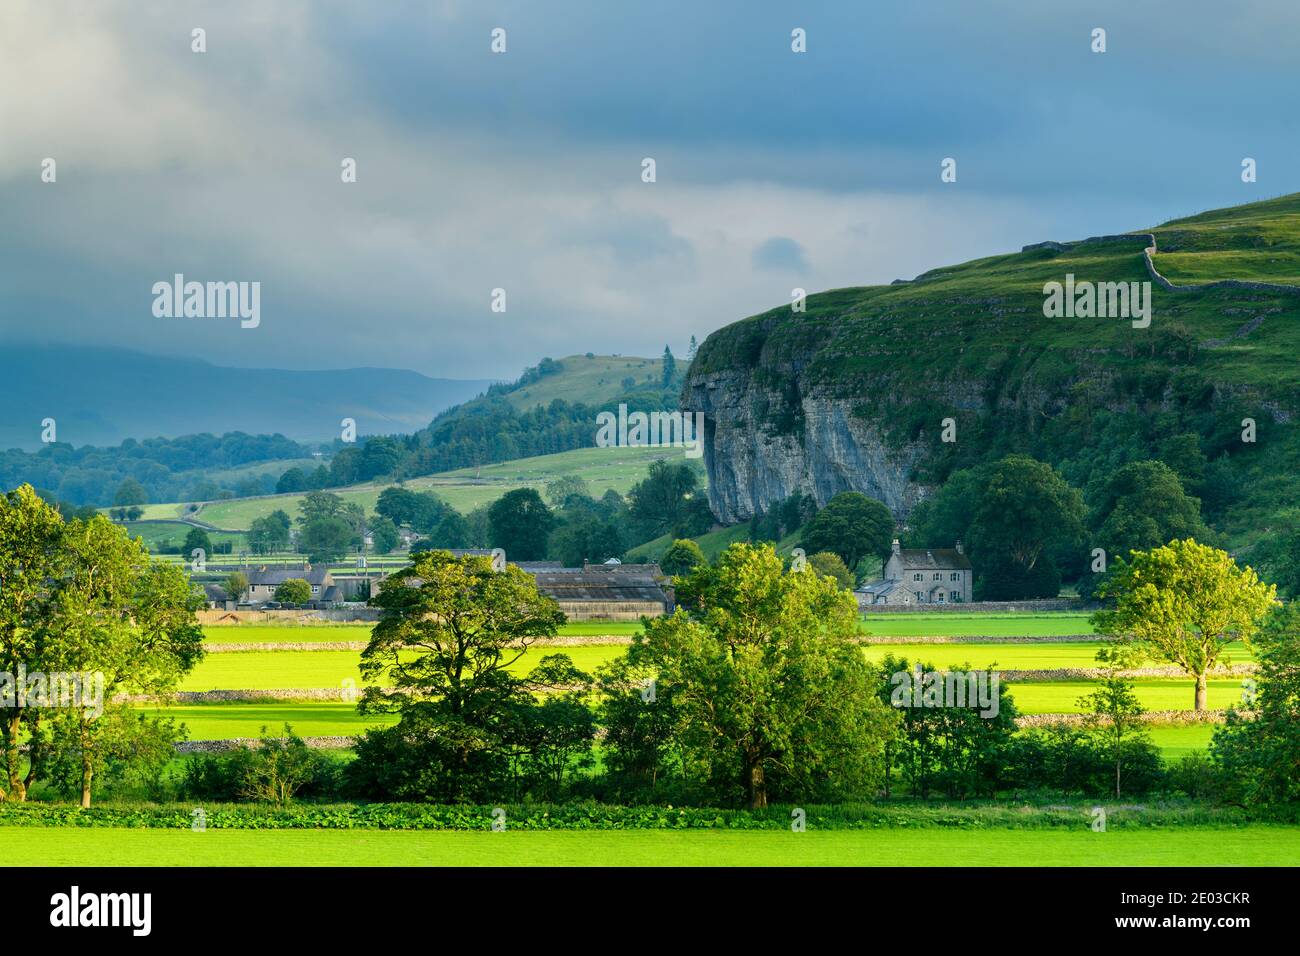 Scenic Wharfe Valley (flat sunlit fields, stone walls, Kilnsey Crag - high limestone cliff, rolling hills) - Wharfedale, Yorkshire Dales, England, UK. Stock Photo